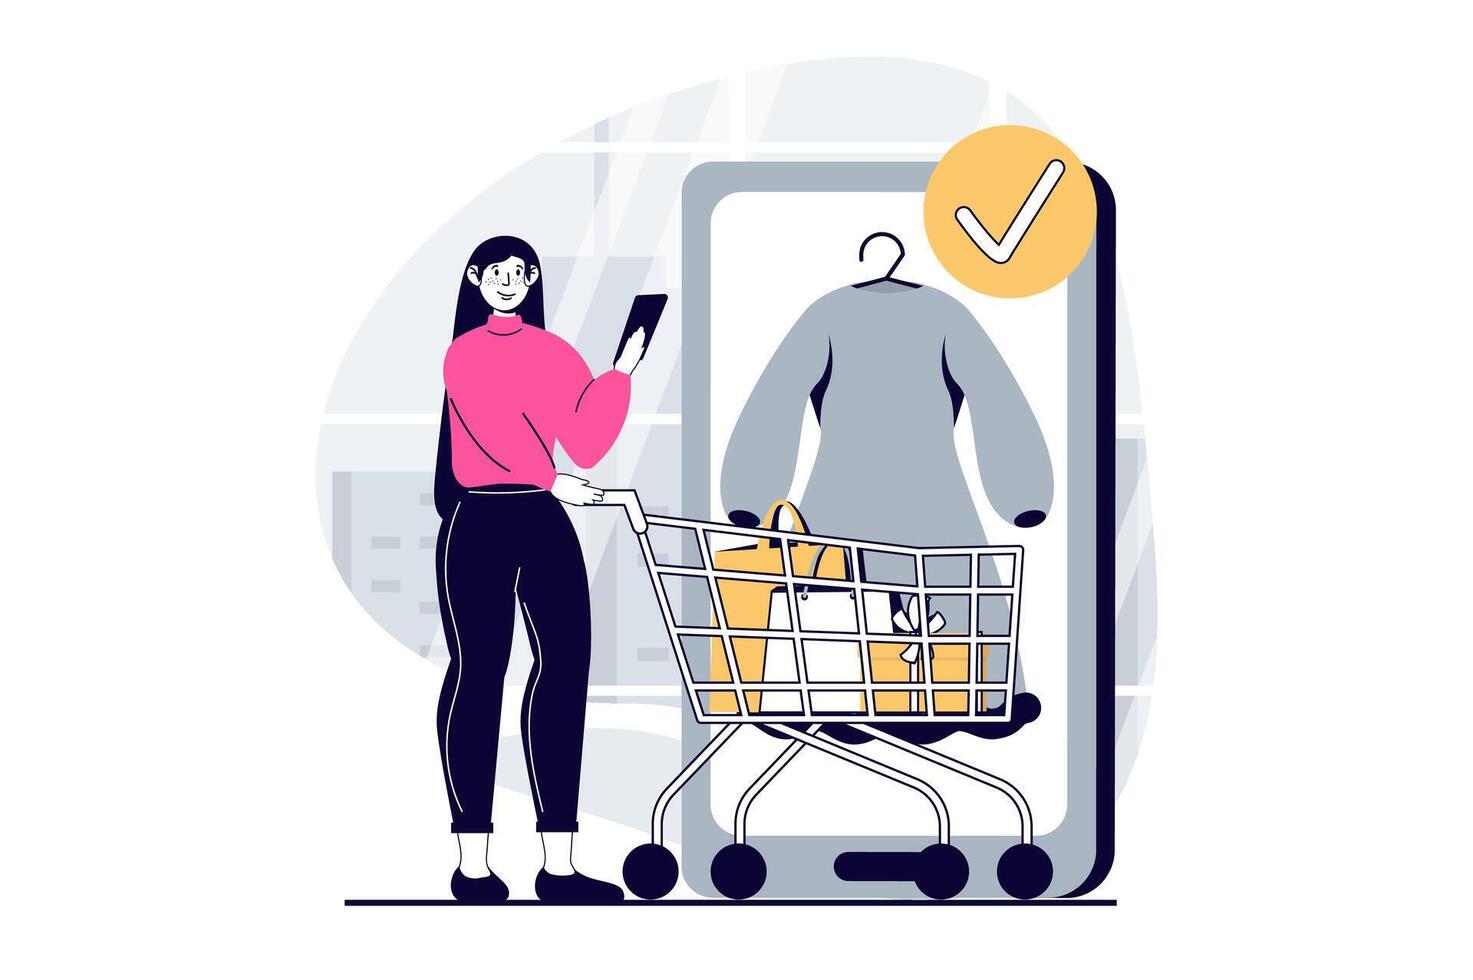 Mobile commerce concept with people scene in flat design for web. Woman with supermarket cart choosing clothes in online store app. Vector illustration for social media banner, marketing material.